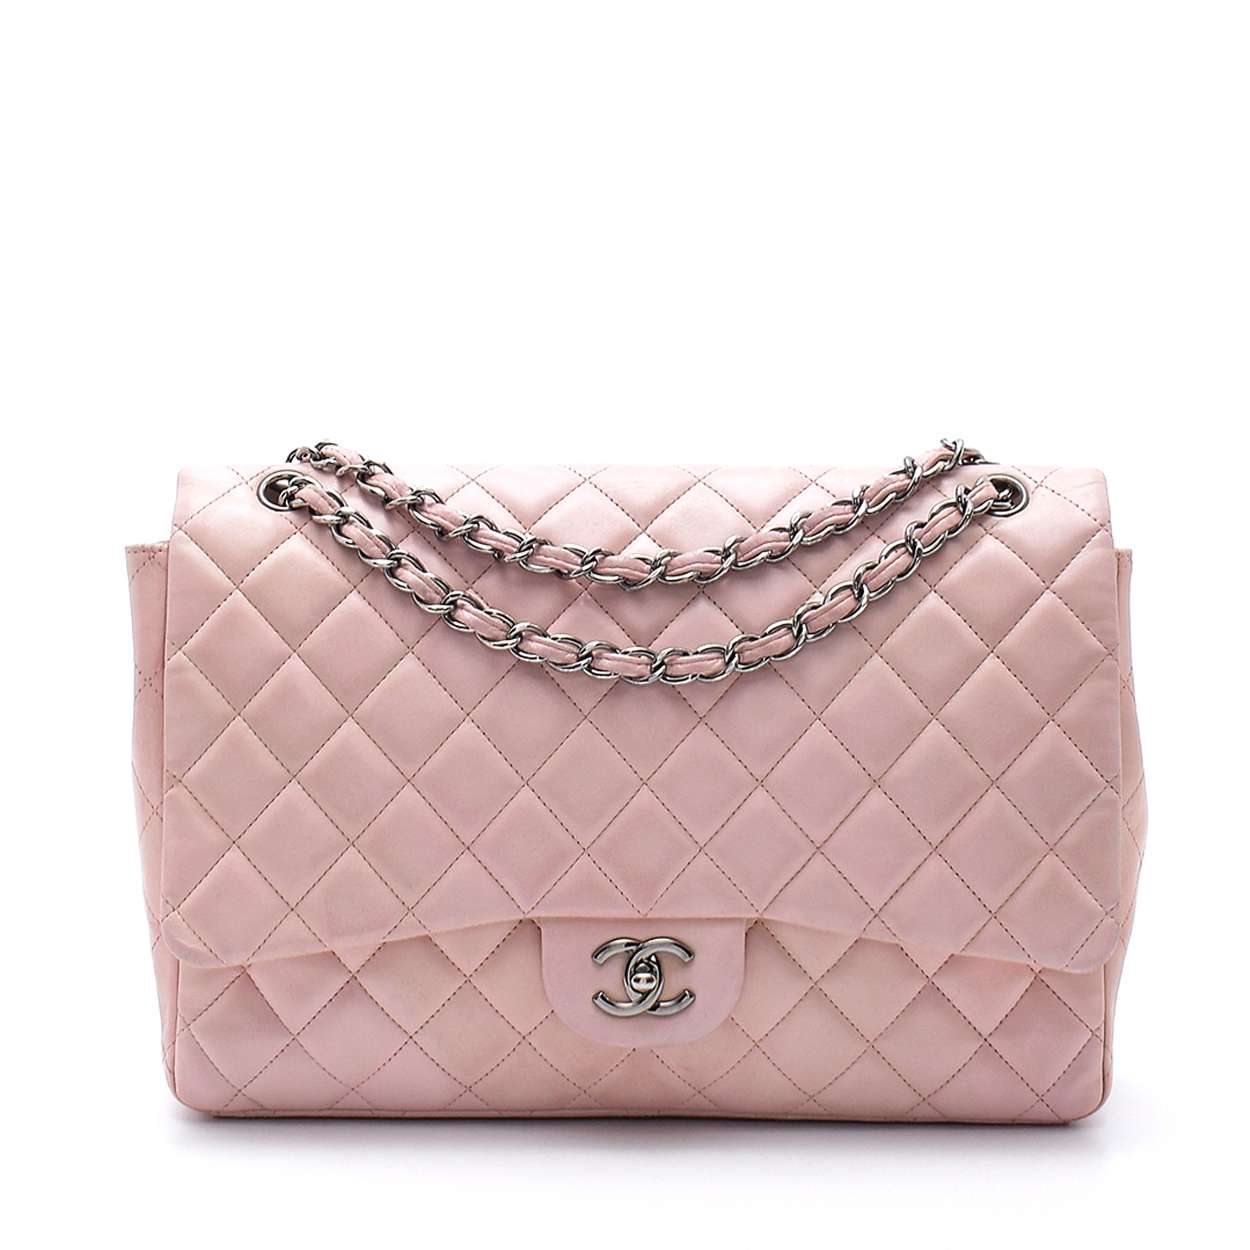 Chanel - Soft Pink Quilted Lambskin Leather Maxi Single Flap Bag